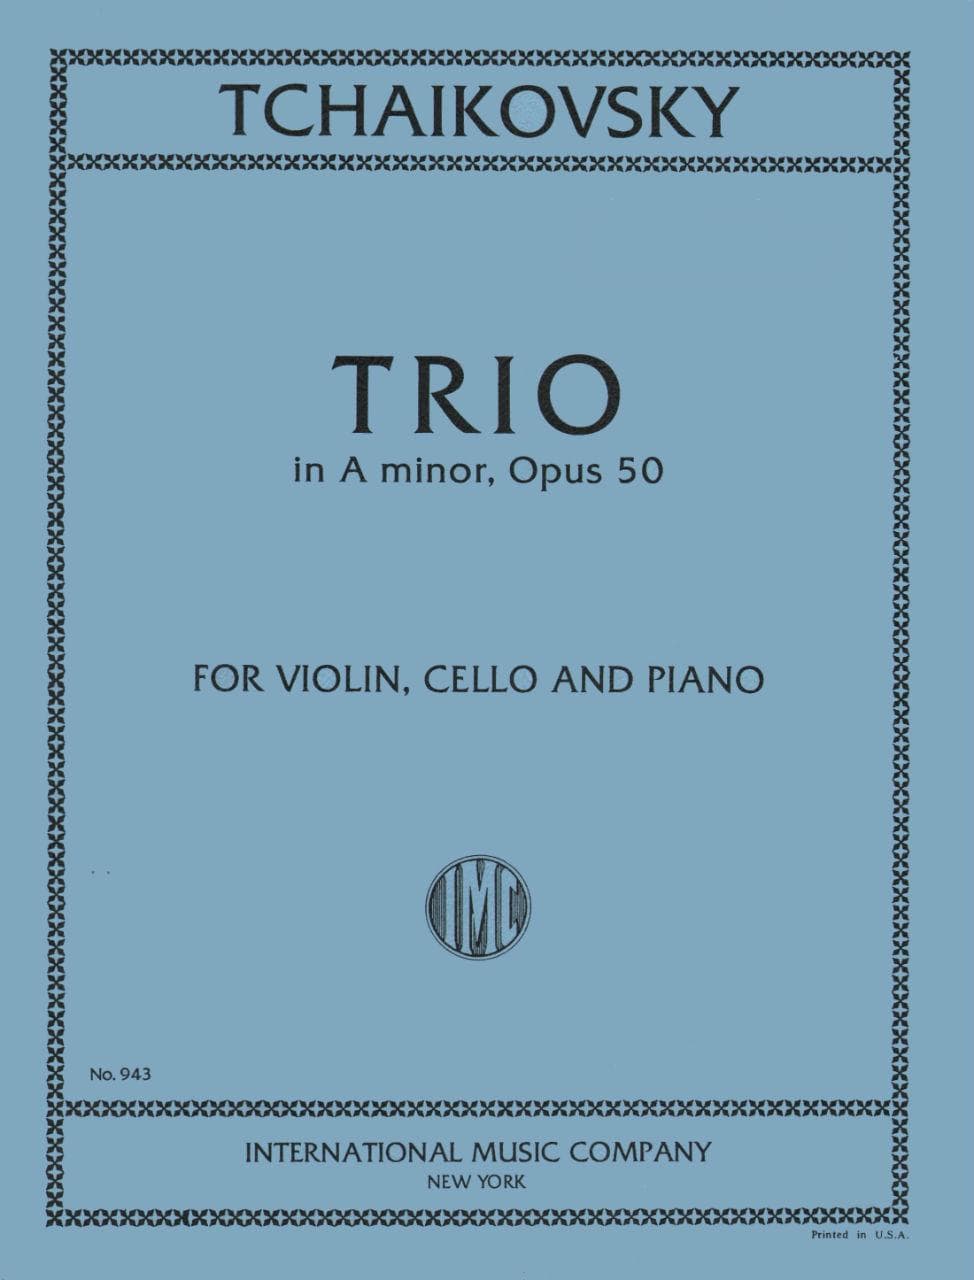 Tchaikovsky, Pyotr Ilyich - Piano Trio in a minor Op 50 For Violin, Cello and Piano Published by International Music Company